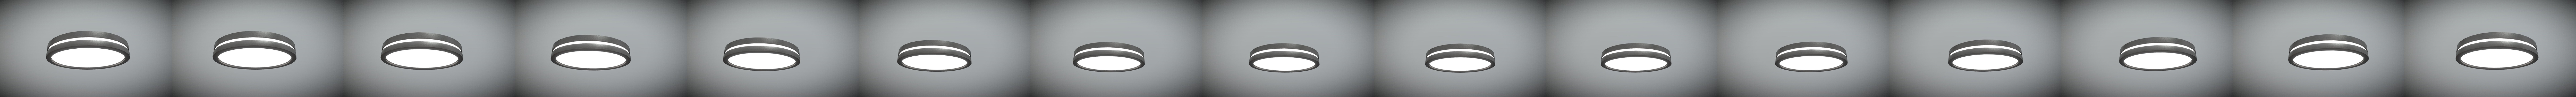 Frontblitzer ceiling of building with lights | 3D model